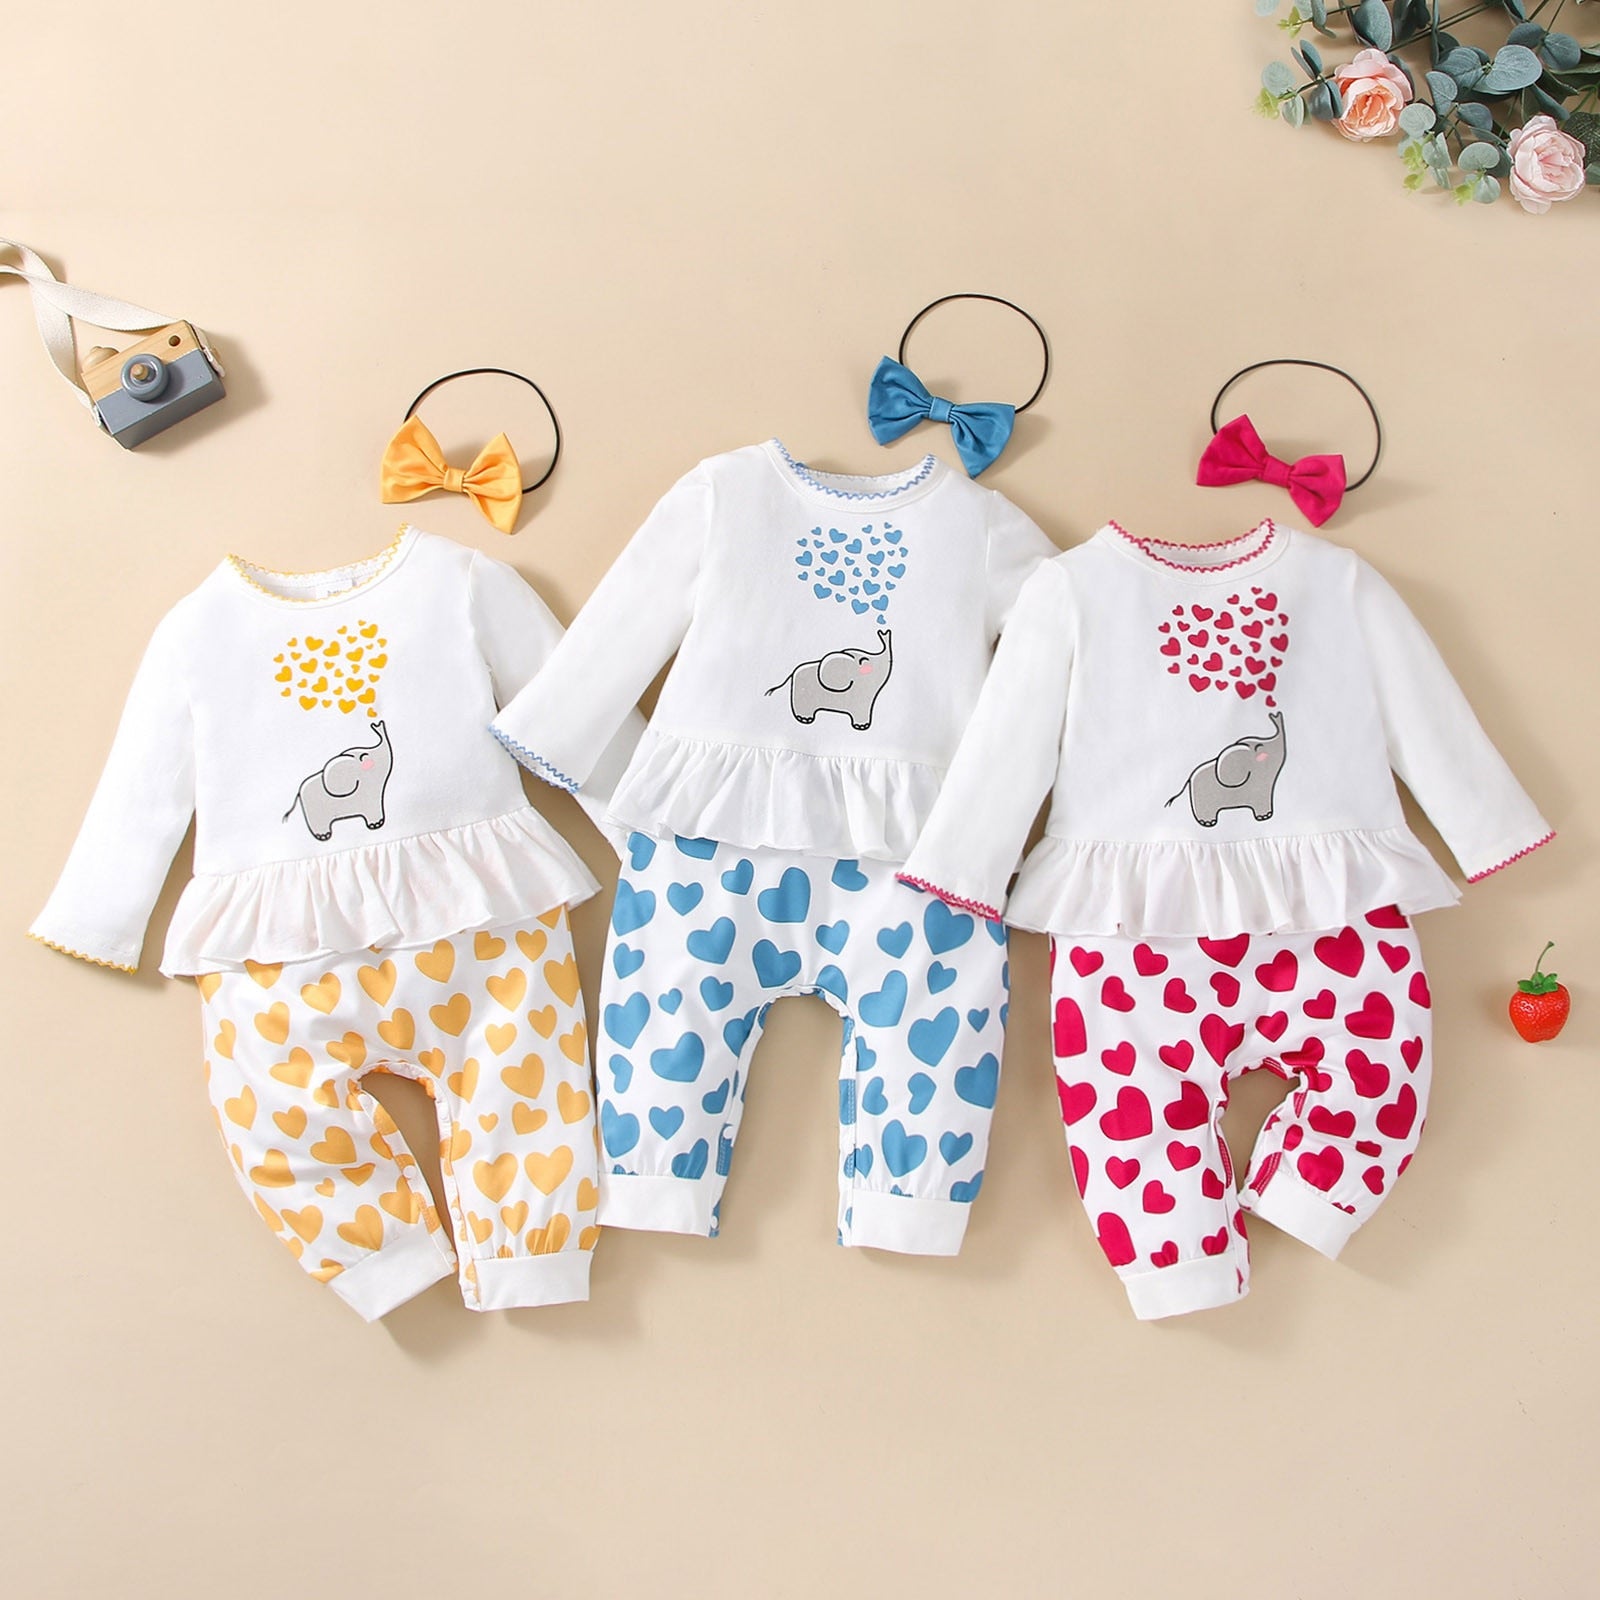 Infant Rompers + Headband Sets Spring Autumn Long Sleeve Suits Boys Girls Cartoon Heart Jumpsuit Girl Clothing Sets